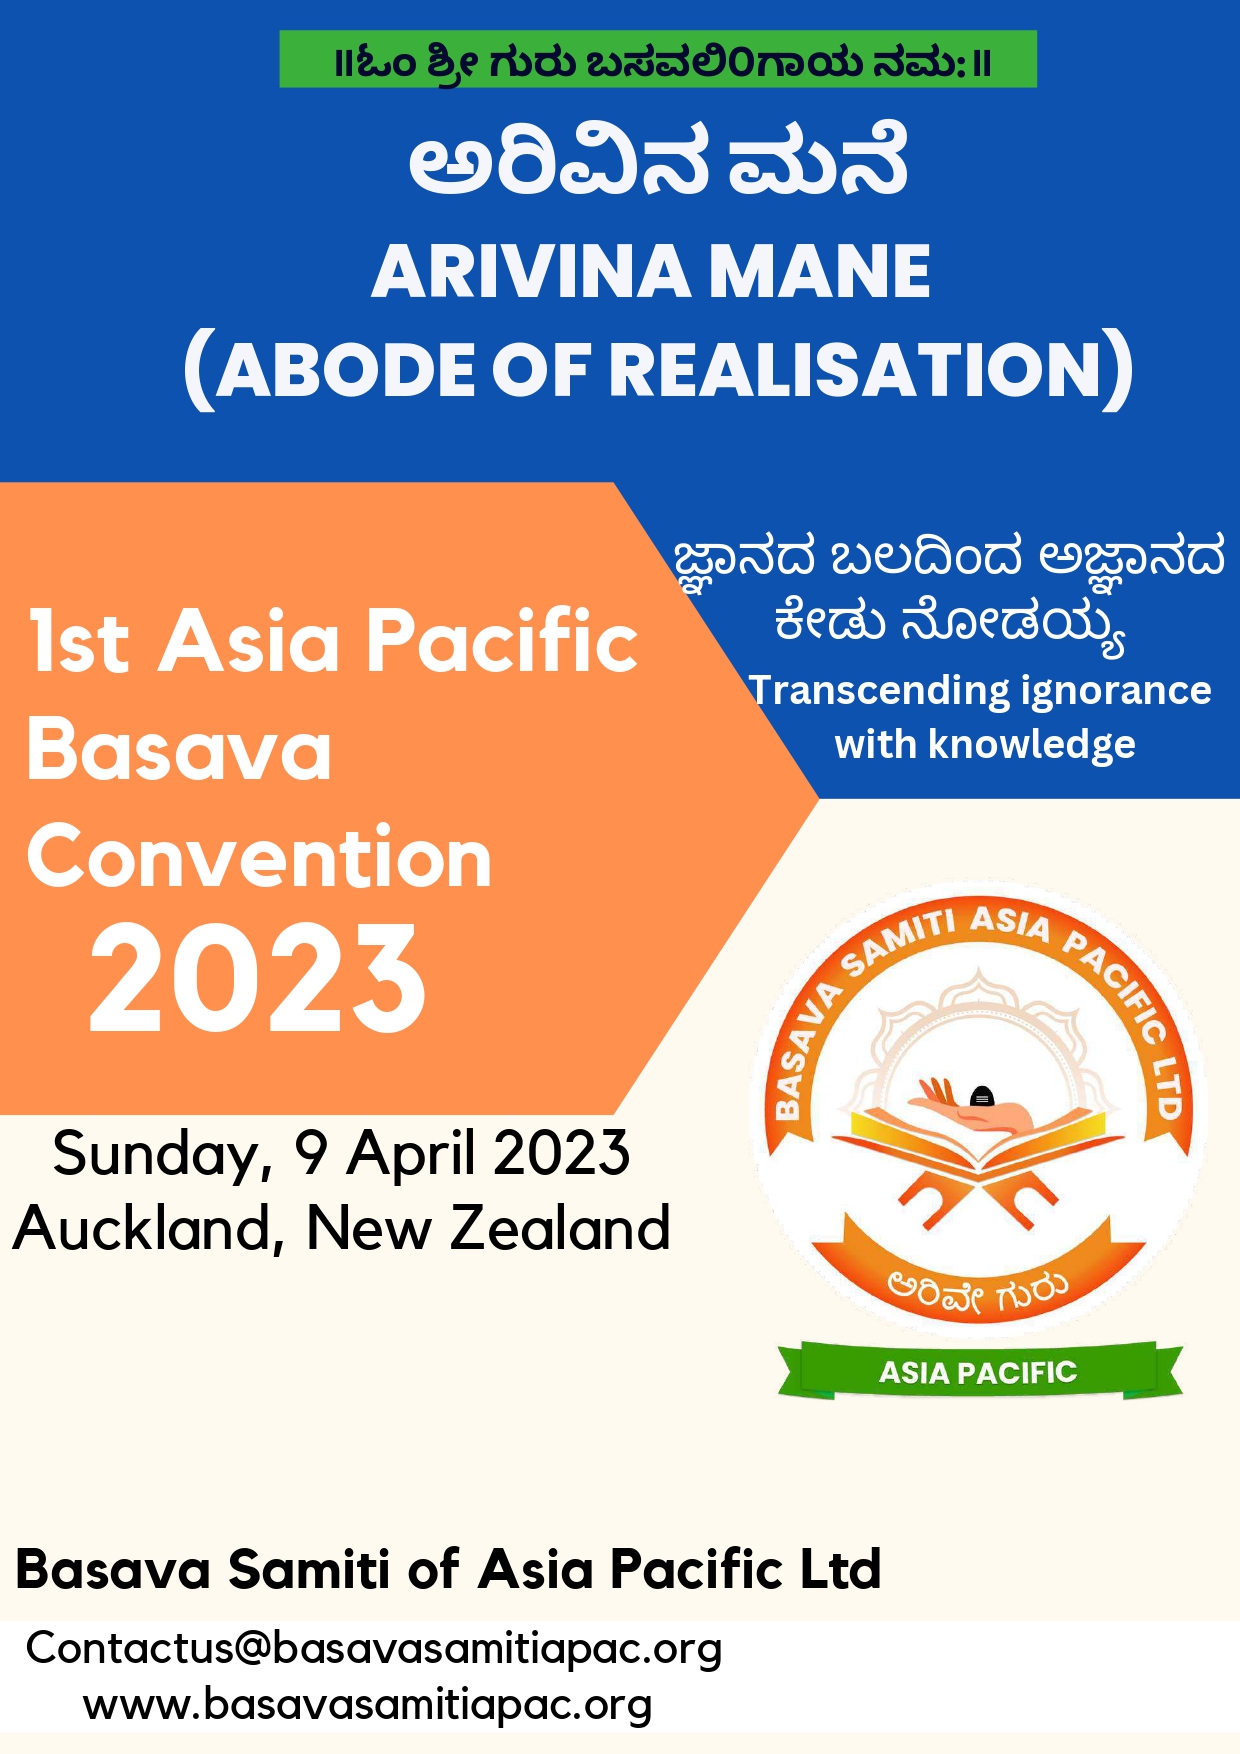 1st Asia Pacific Basava Convention